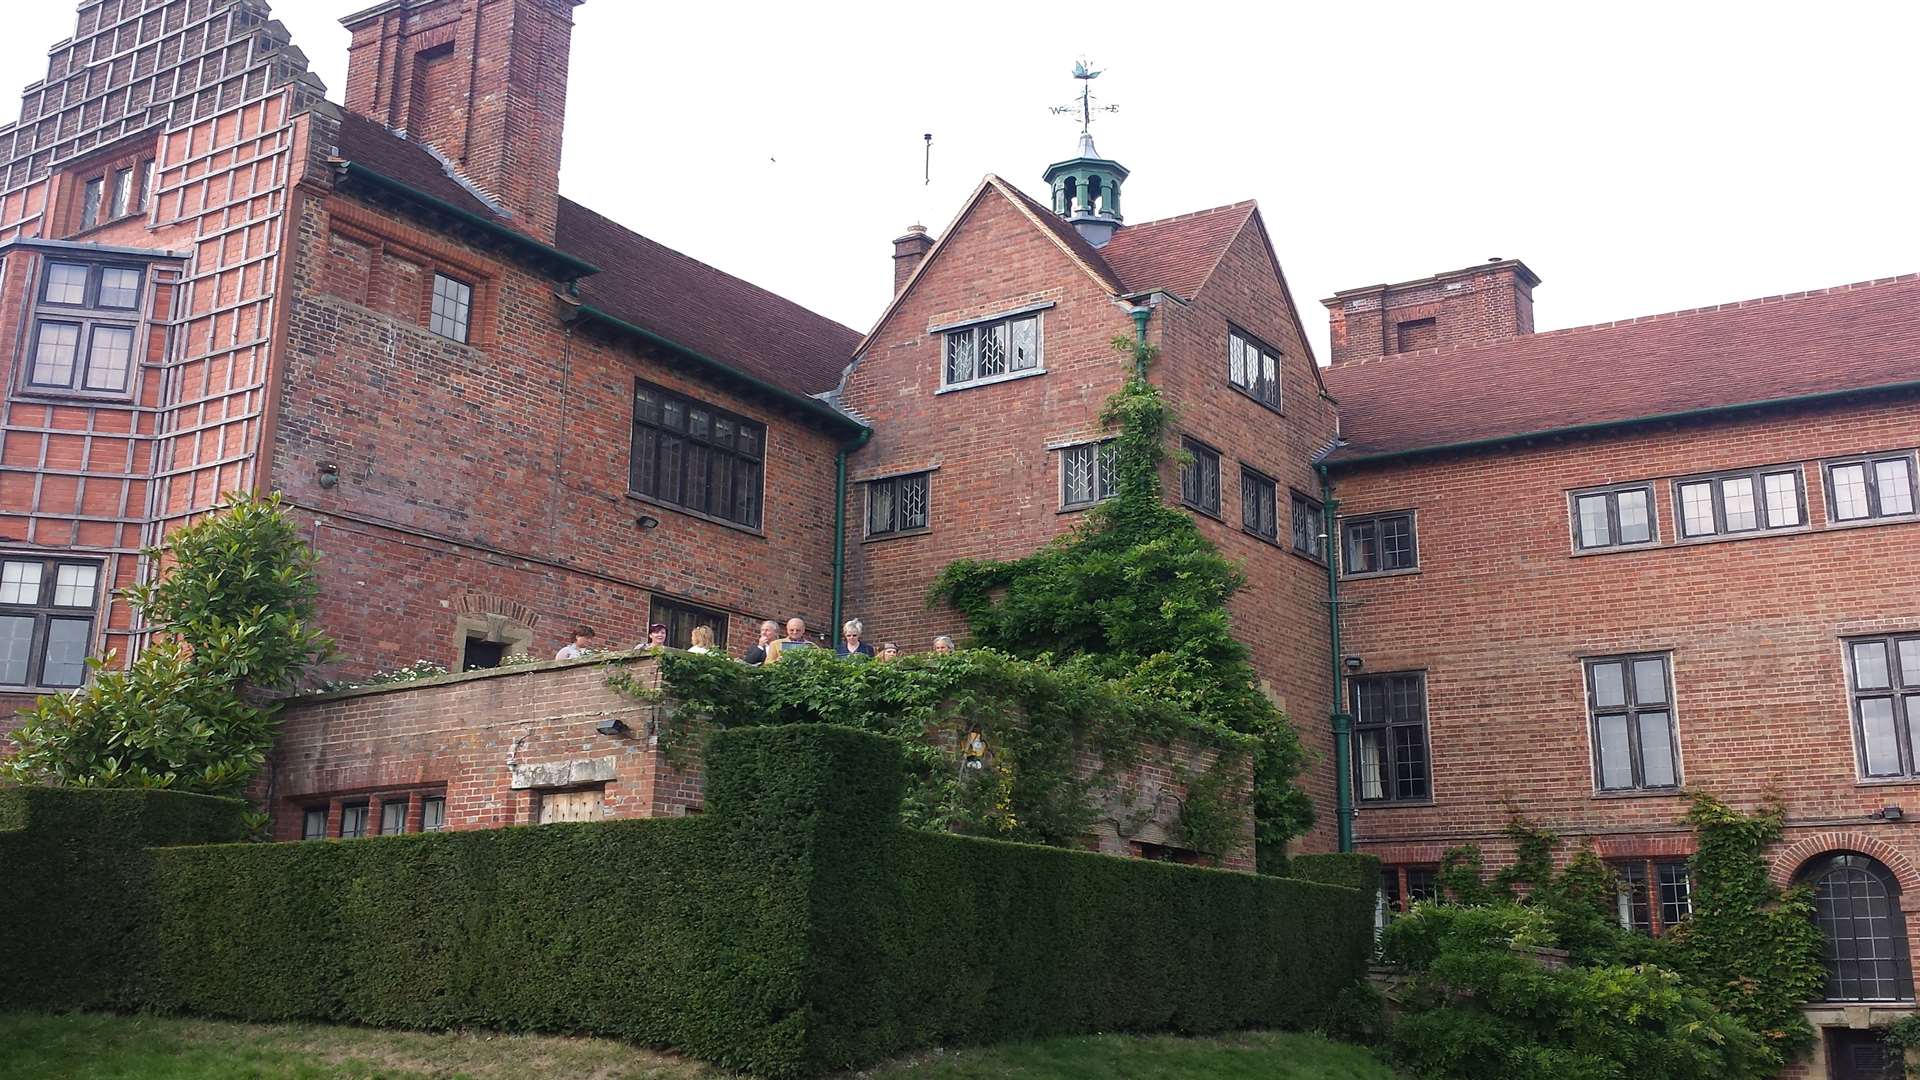 The former home of Sir Winston Churchill, Chartwell